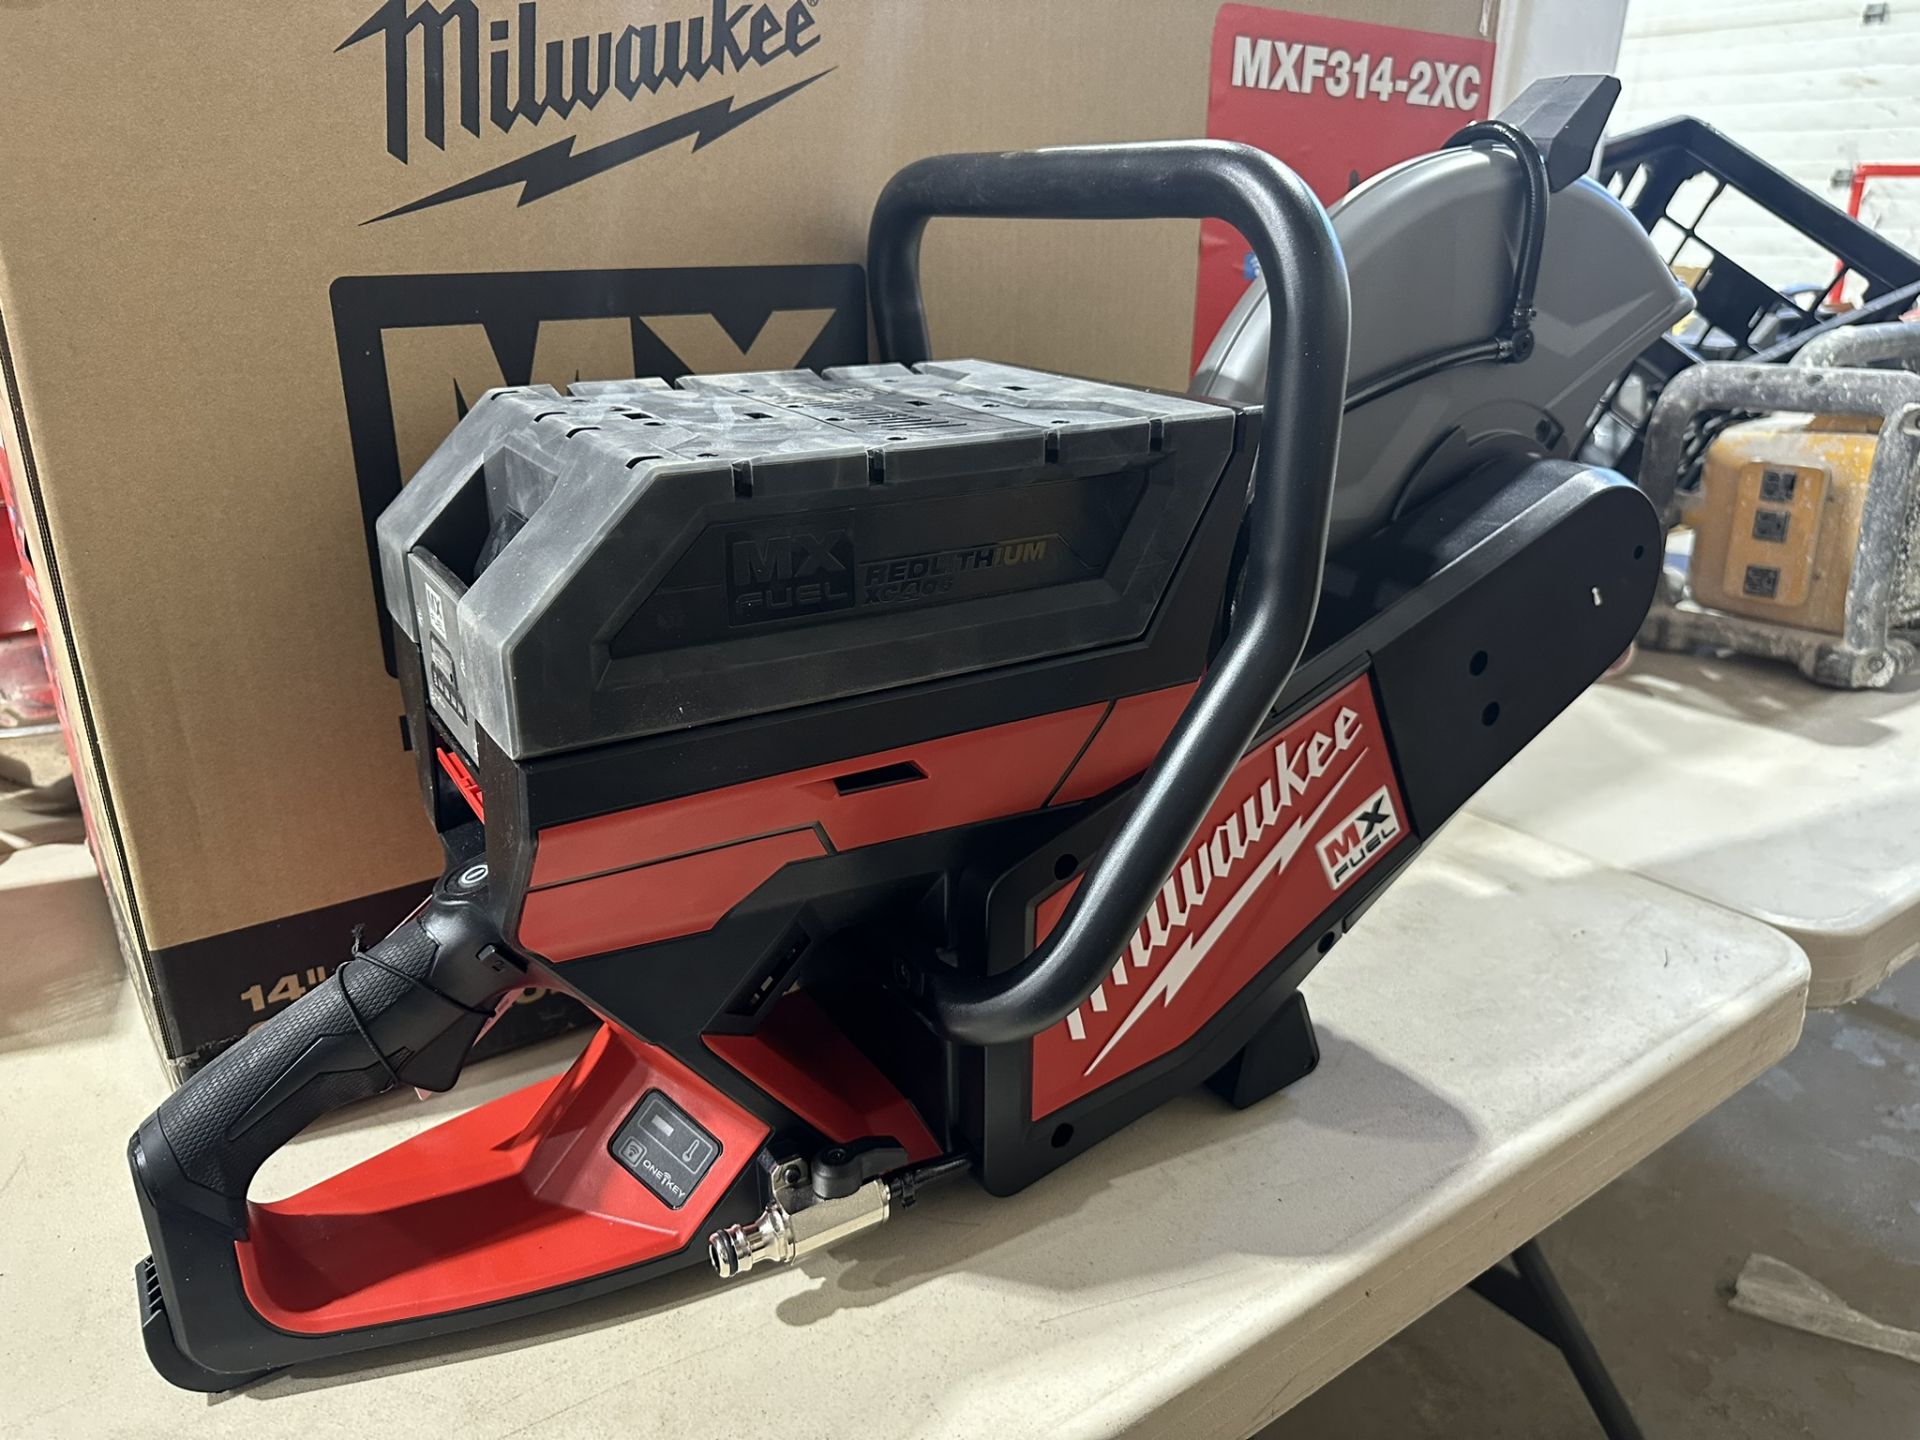 MILWAUKEE MXF314-2XC CORDLESS 14" DEMOLITION SAW W/ 2 XC406 BATTERIES AND CHARGER (NEW IN BOX) - Image 5 of 8